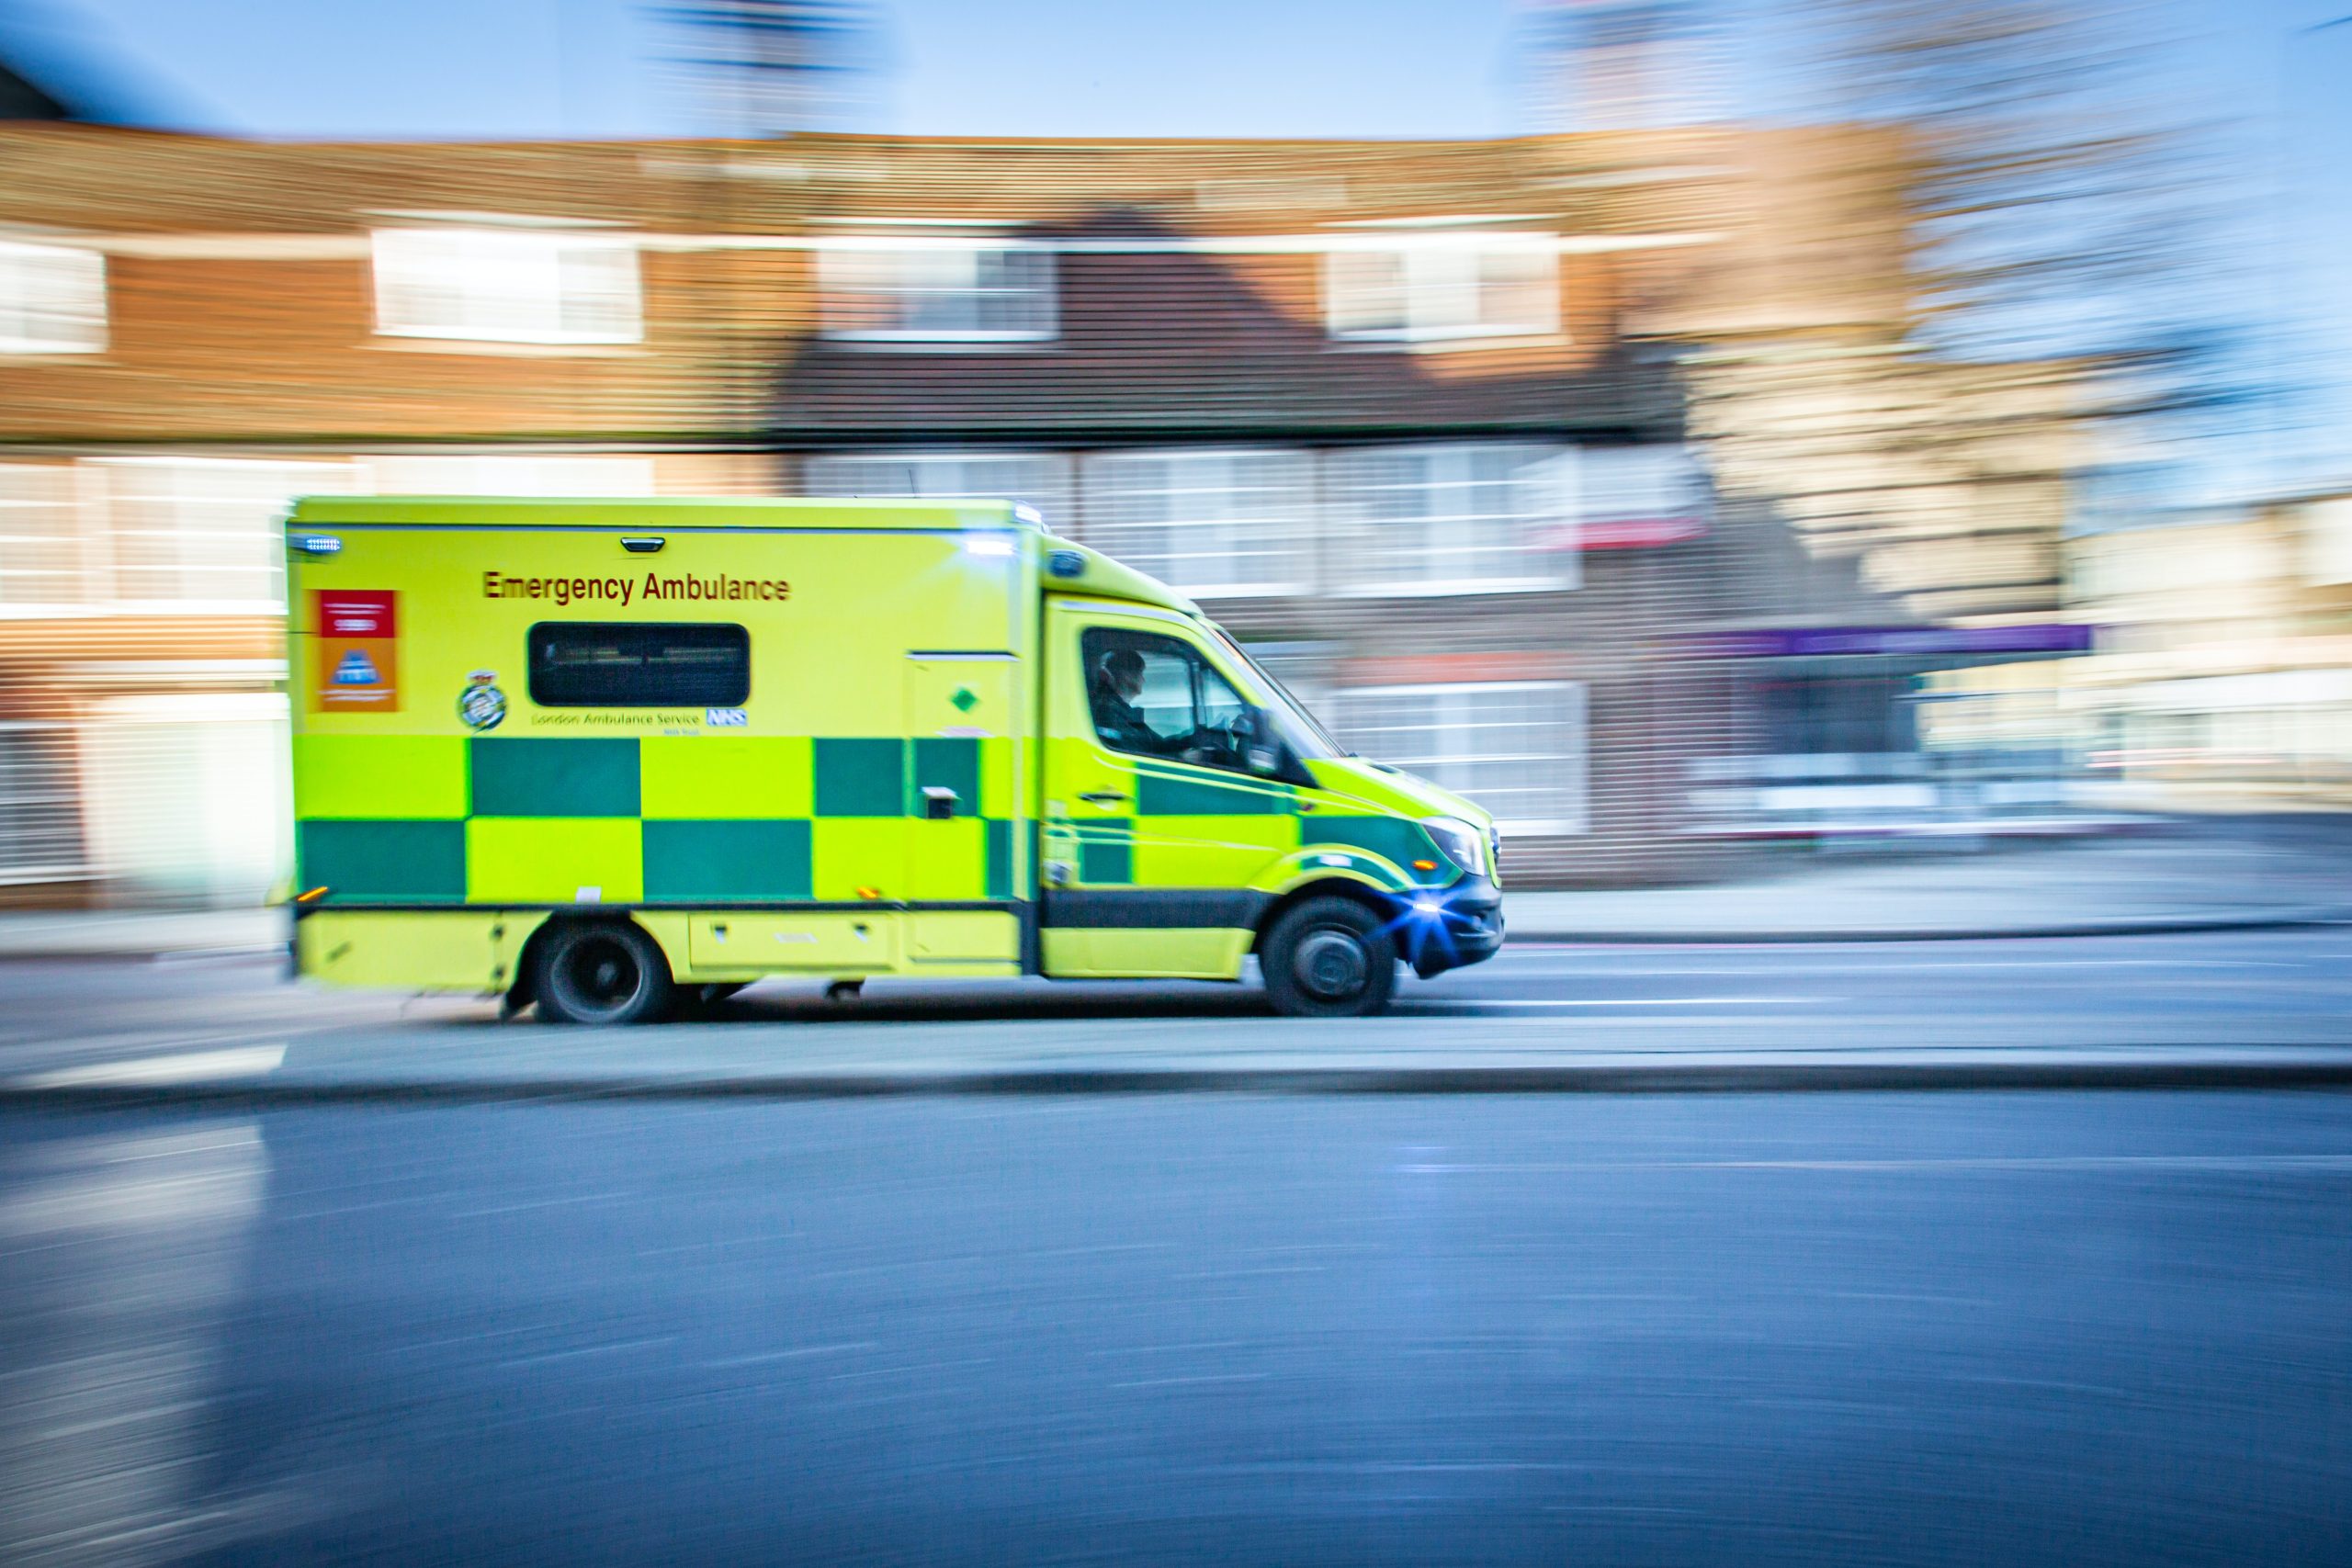 NEWS | Man suffers serious injuries following incident in Hereford